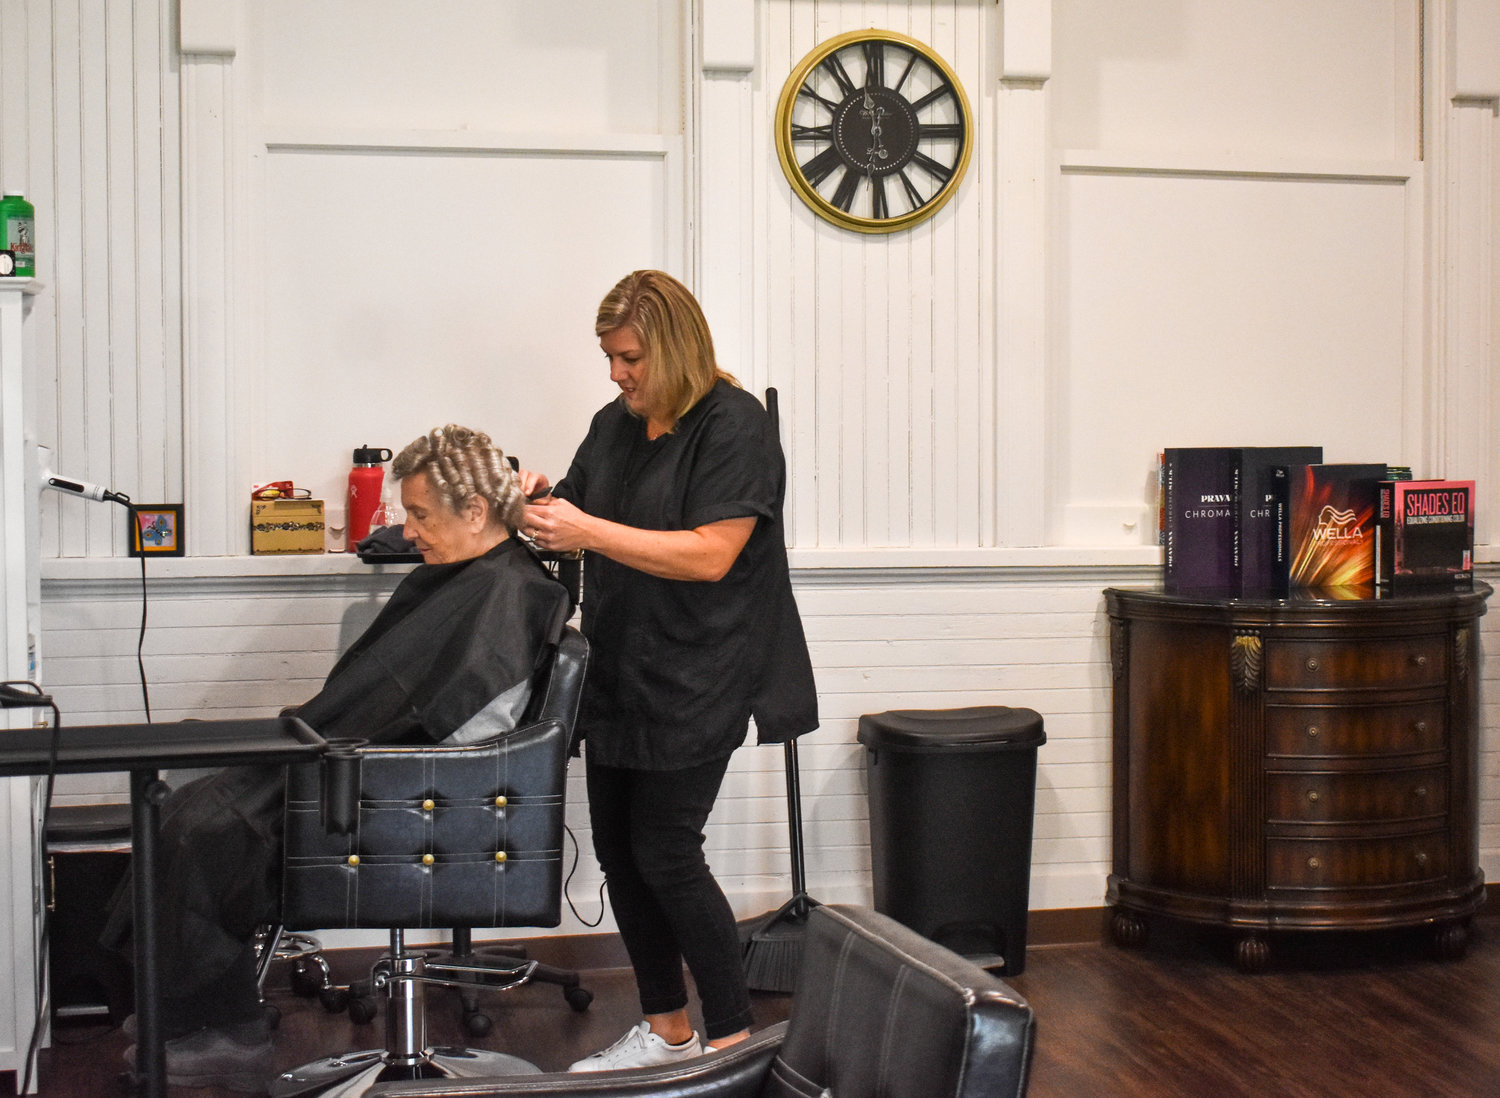 A patron gets her hair done at Station 44 Salon located inside RW3 Depot at 44 Milford Street, Hamilton.